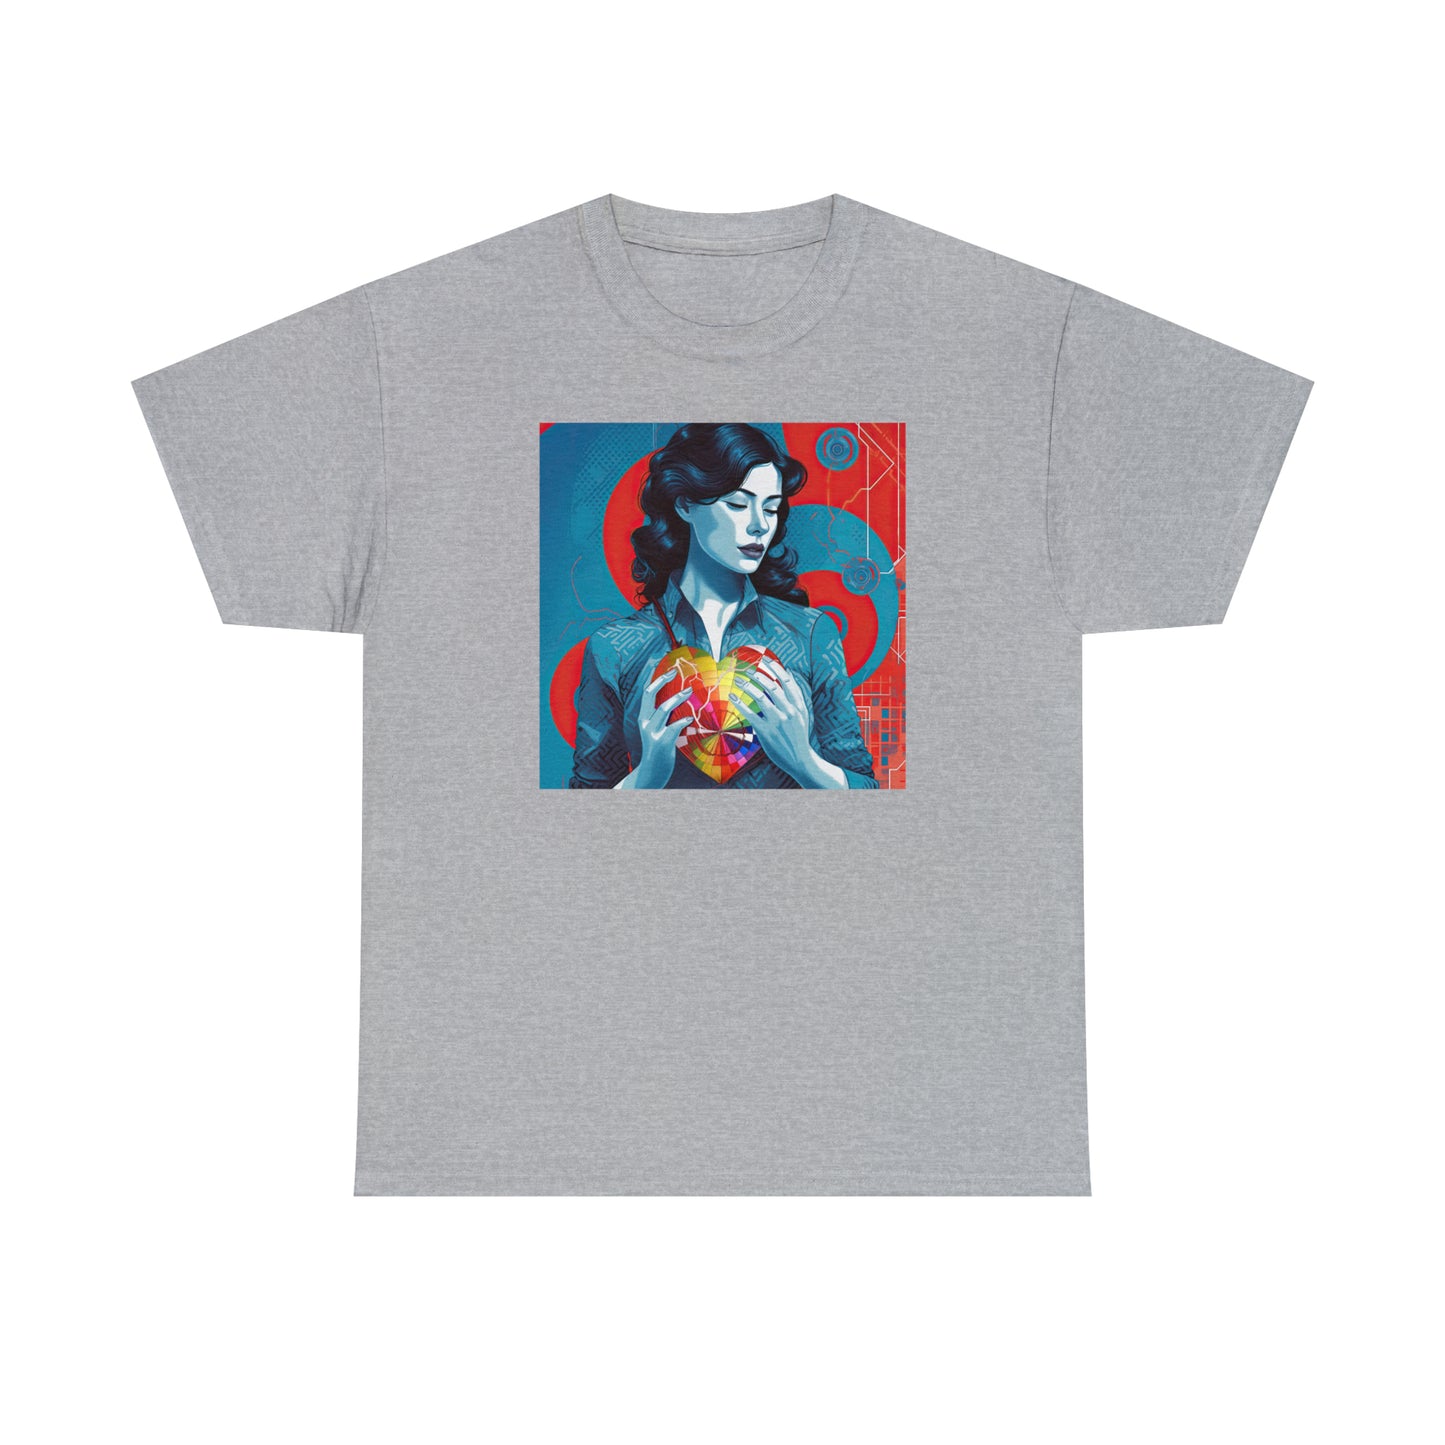 Holding Hearts - Graphic Tee